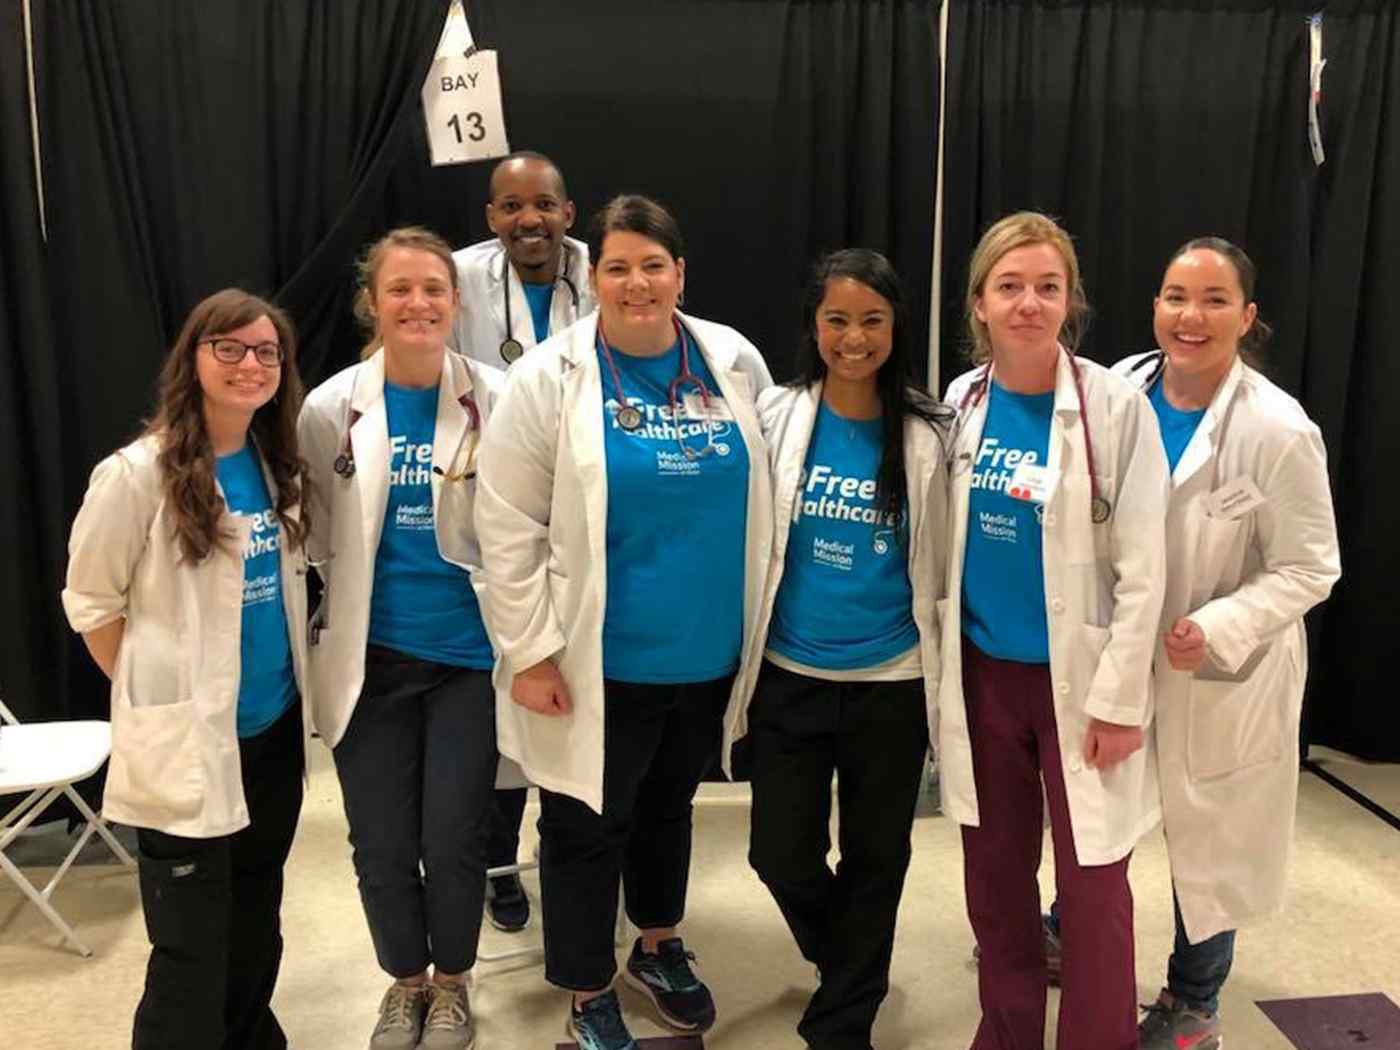 Students in the School of Nursing get hands-on experience providing a day of free health care to patients with little or no health insurance.